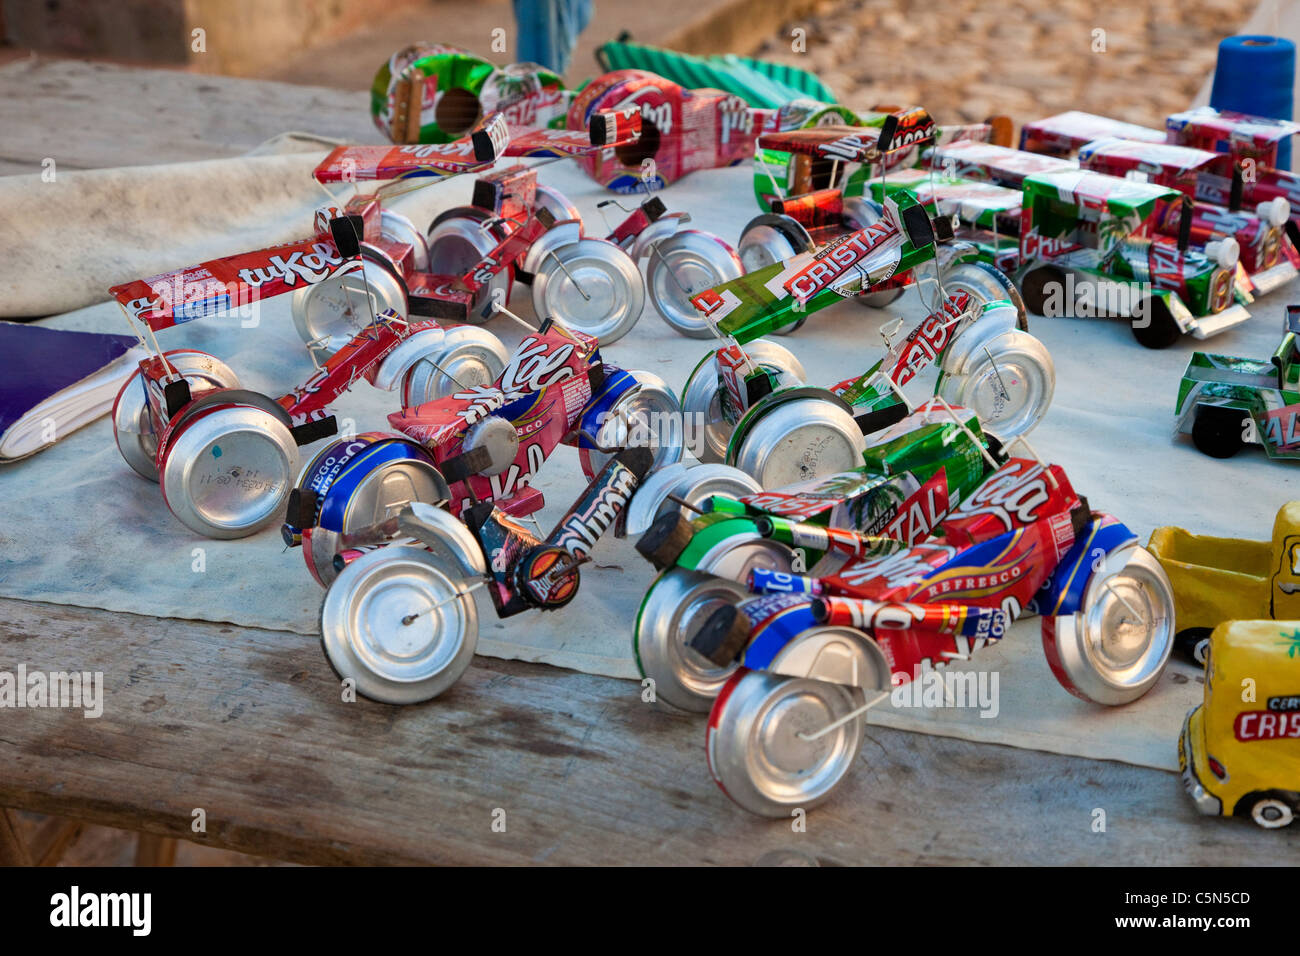 Cuba, Trinidad. Toy Cars, Motorcycles, made out of Old Soft Drink Cans  Stock Photo - Alamy